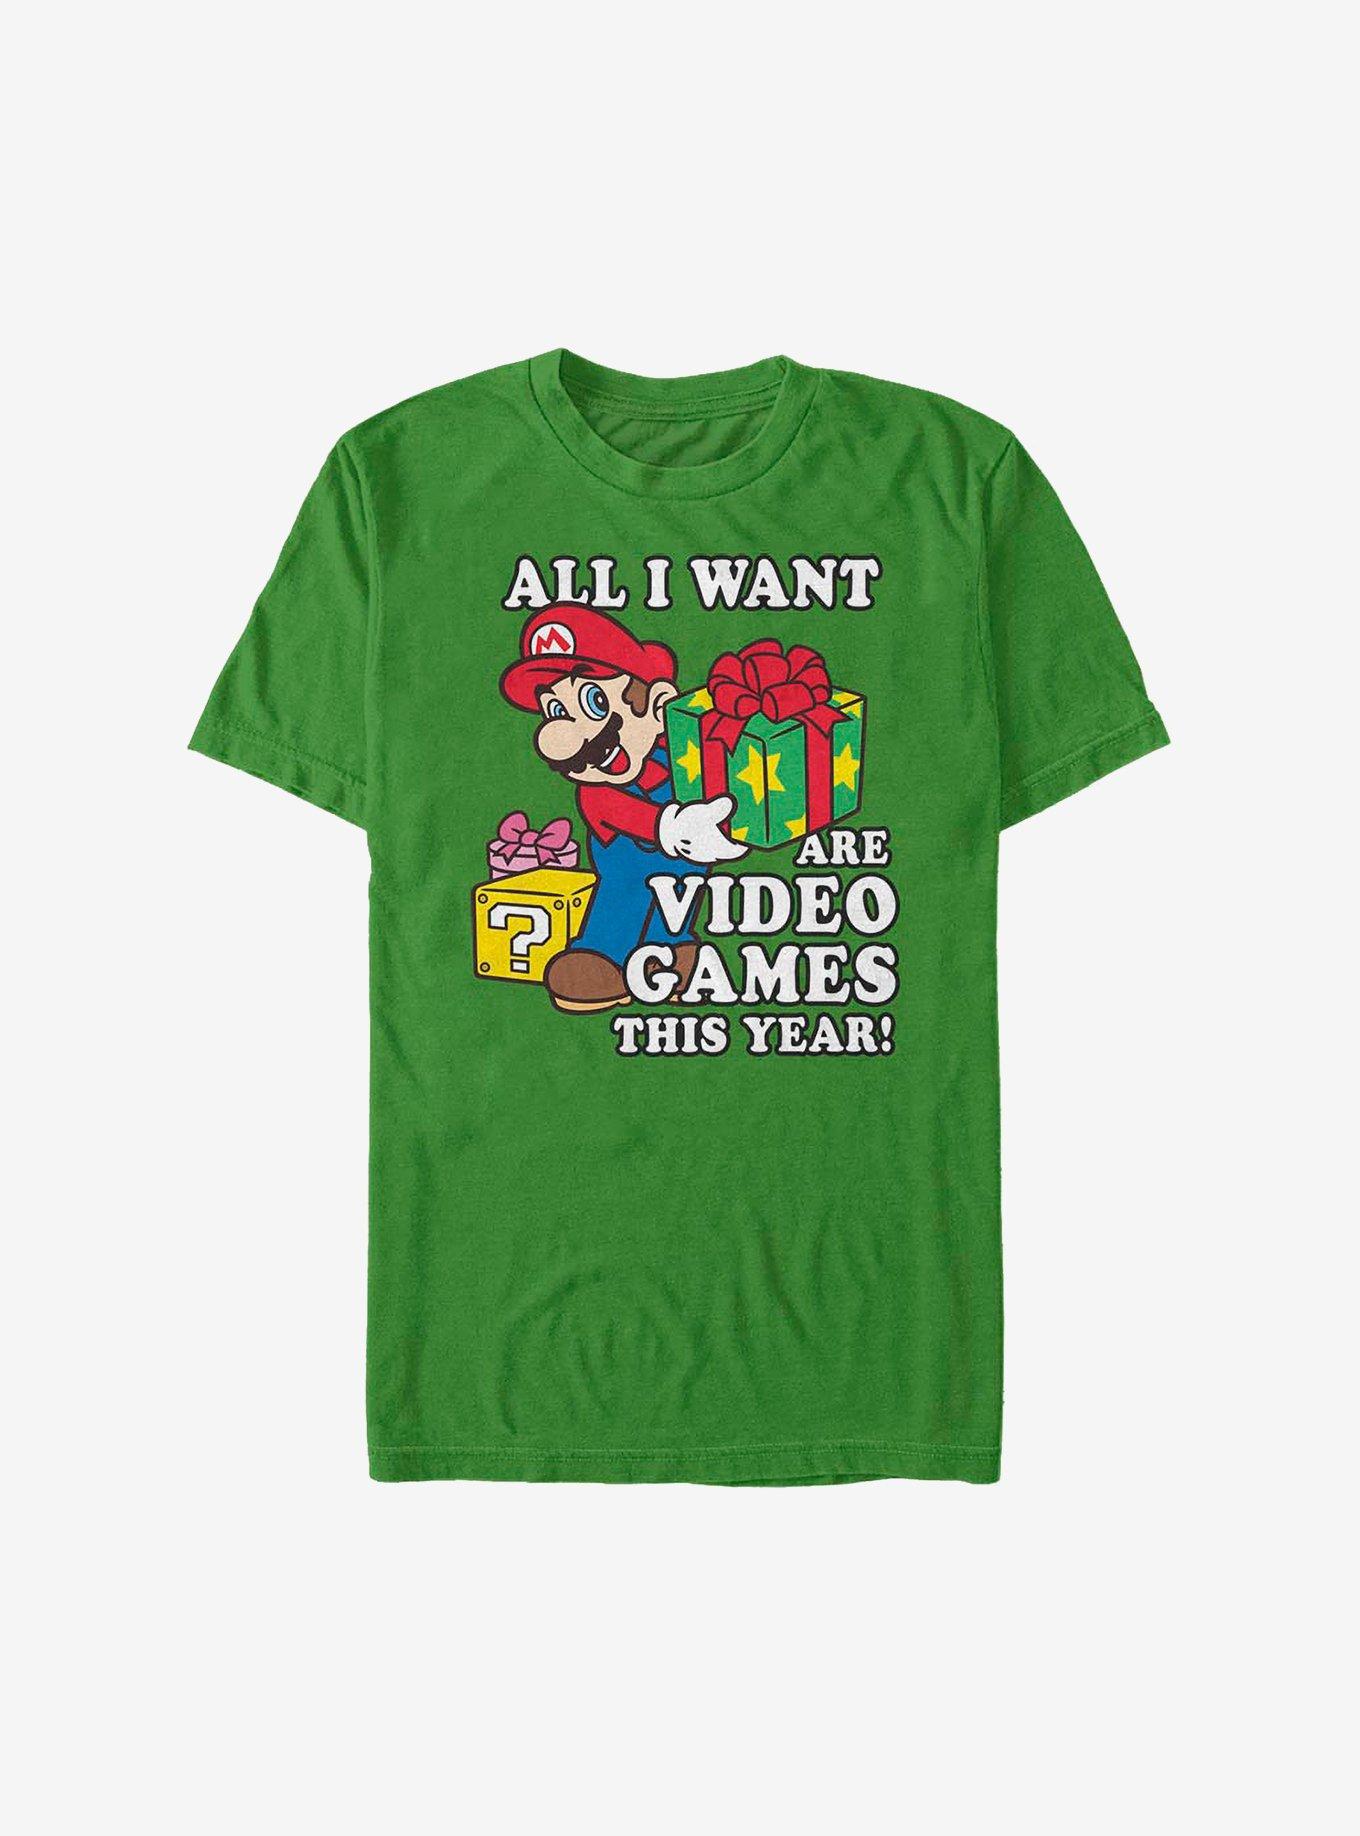 Super Mario All I Want Are Video Games Holiday T-Shirt